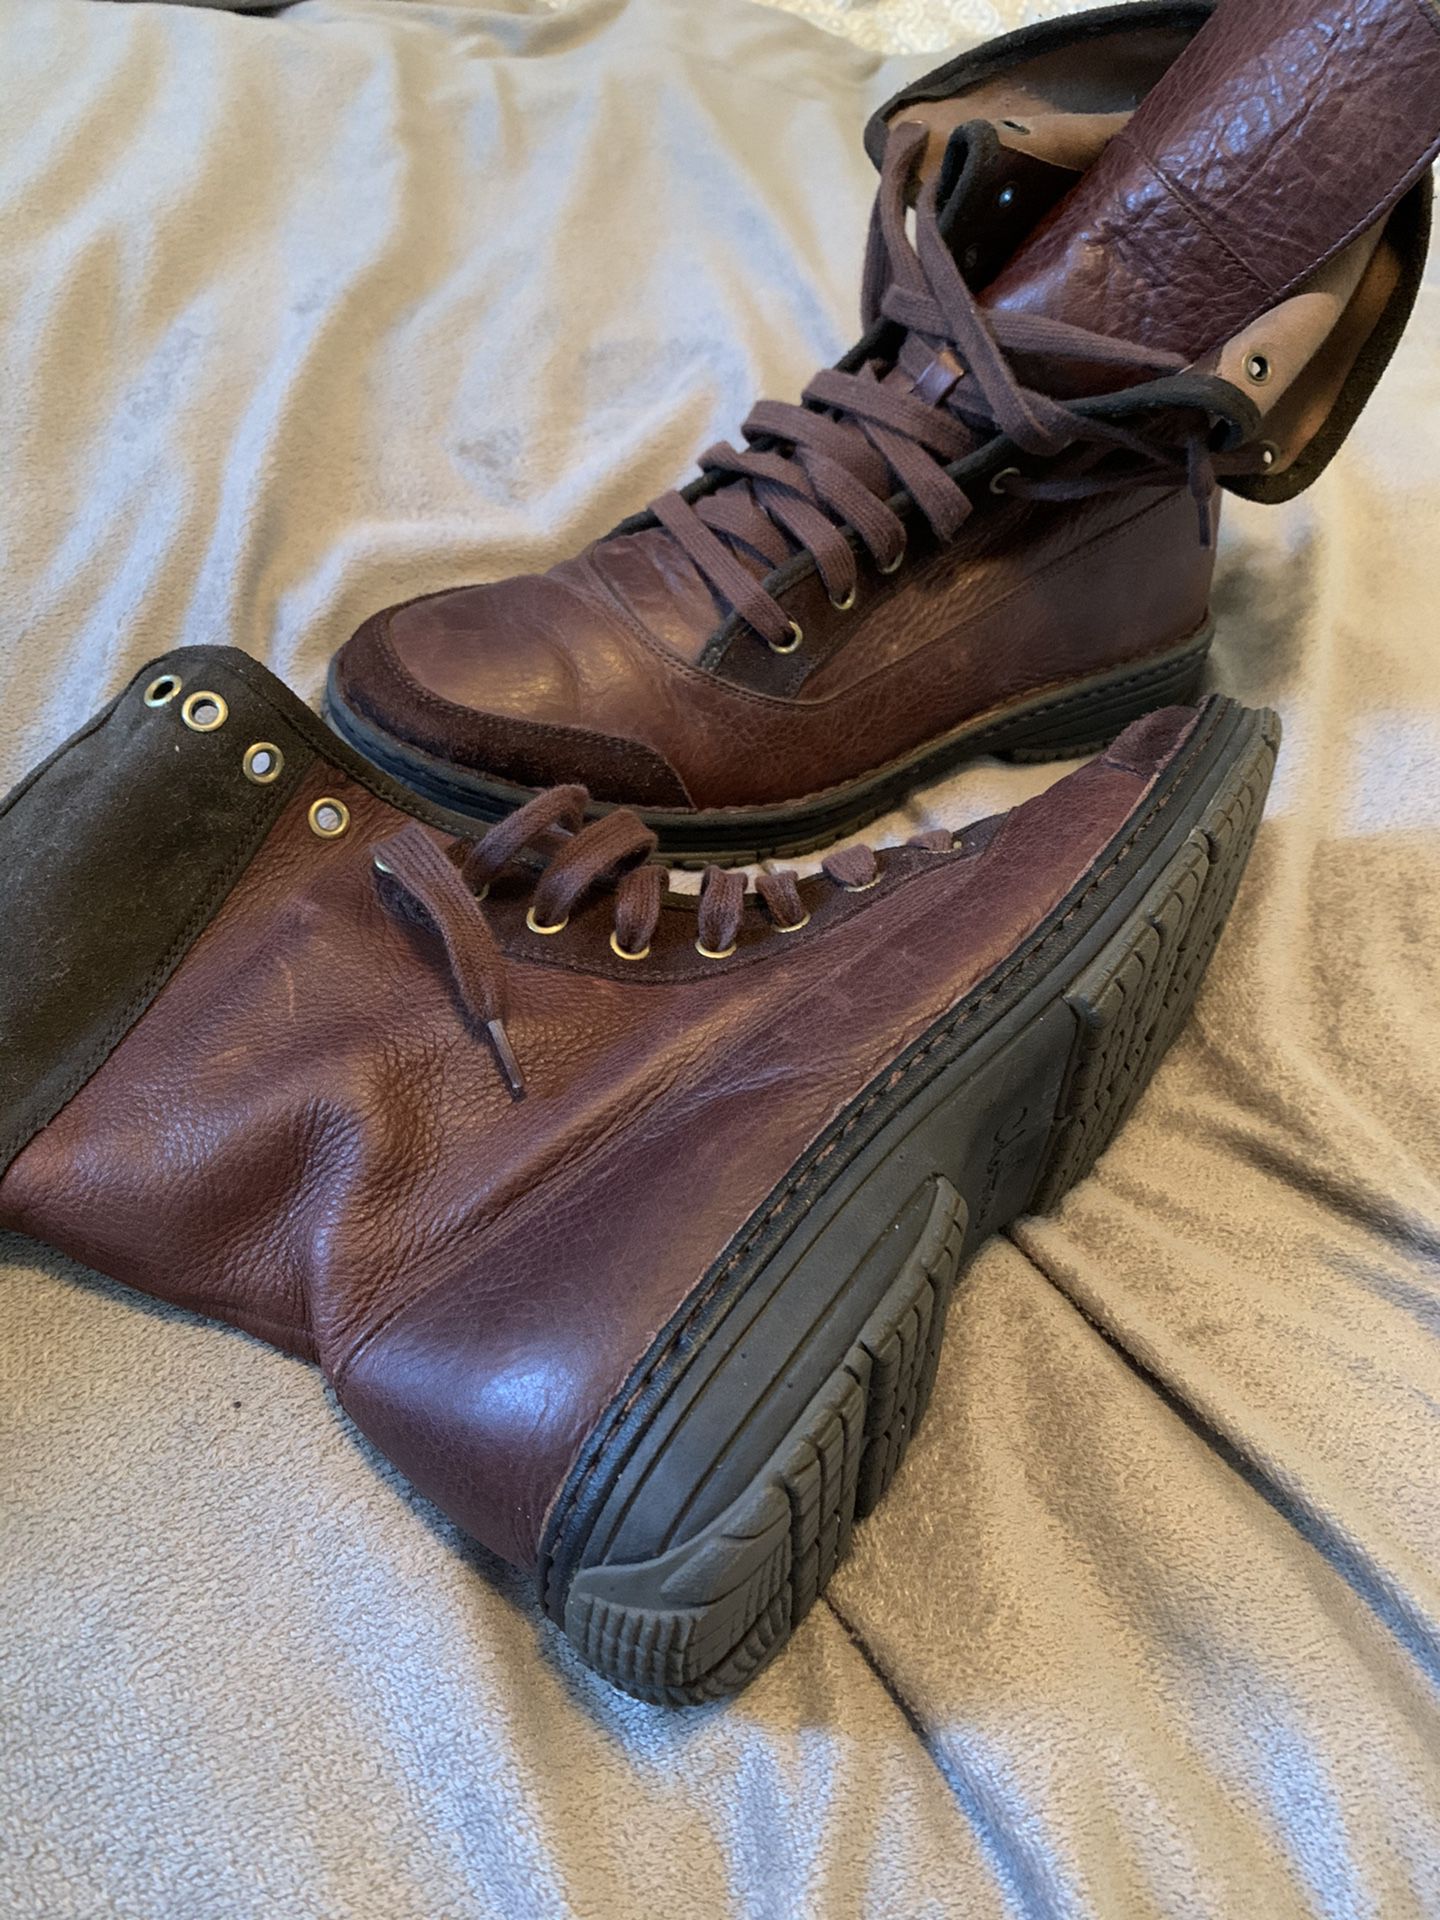 Cole Haan Nike Air shoe/boots size 10